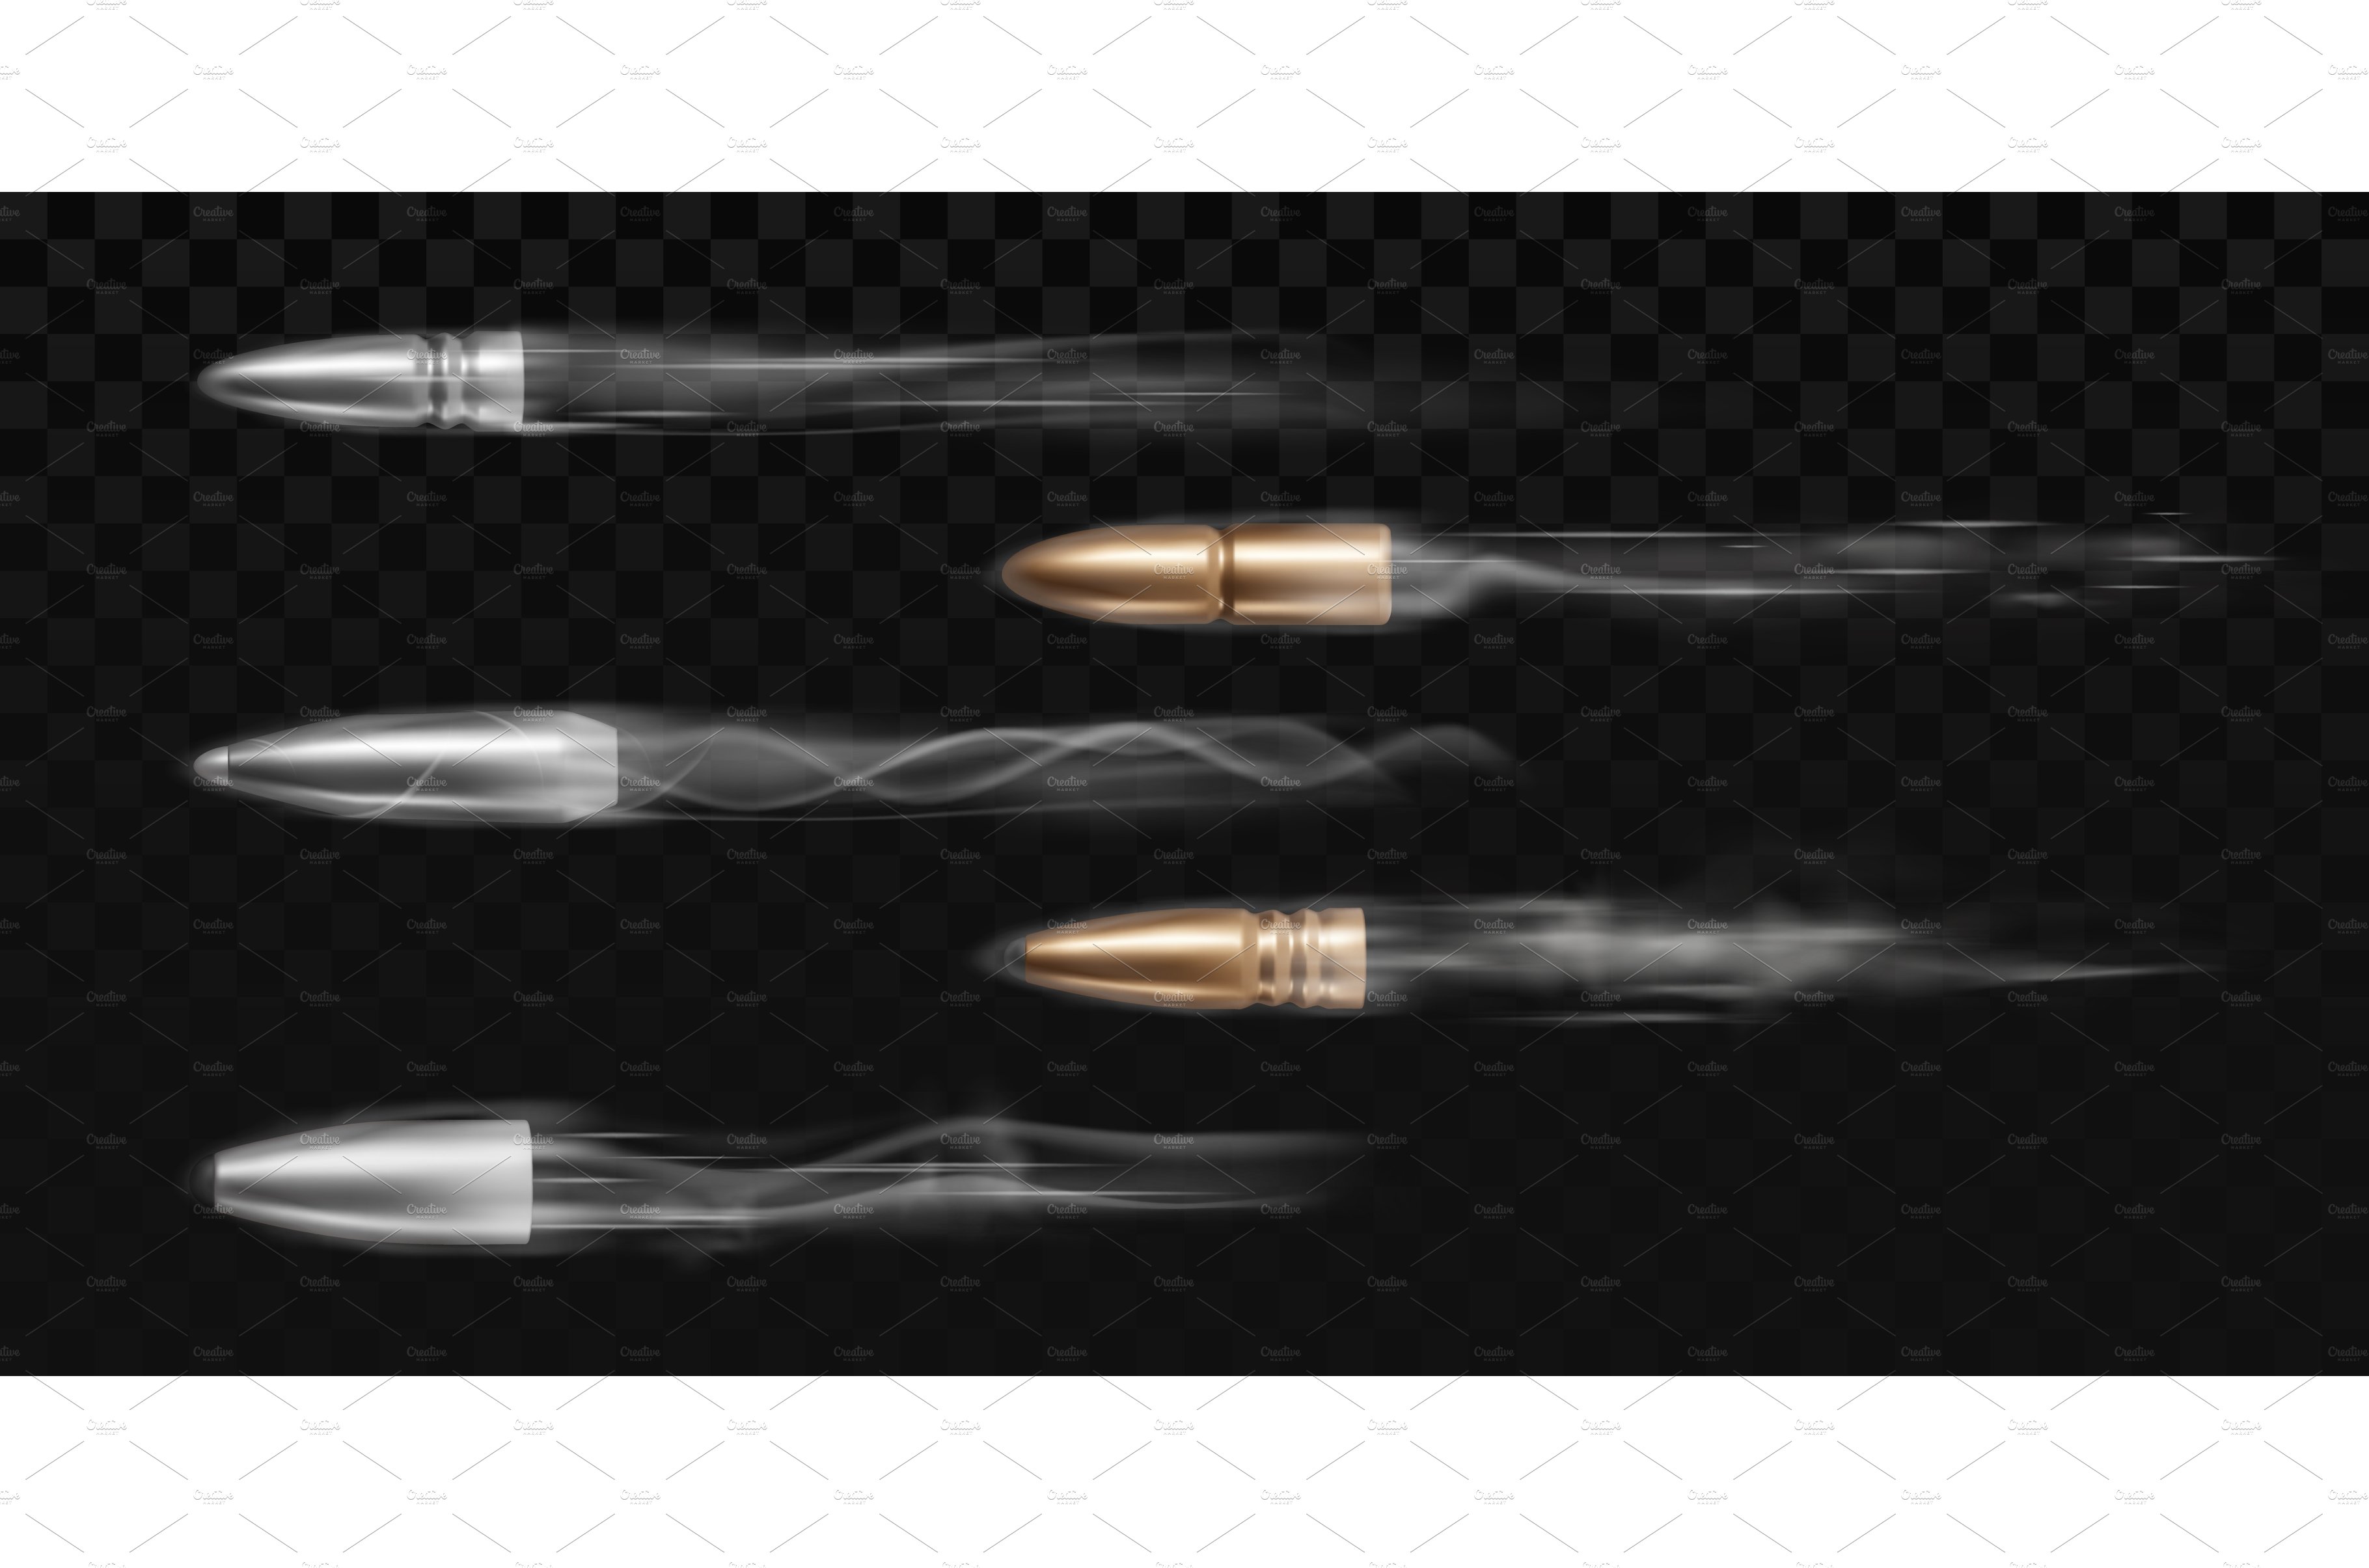 Fired bullets with smoke traces cover image.